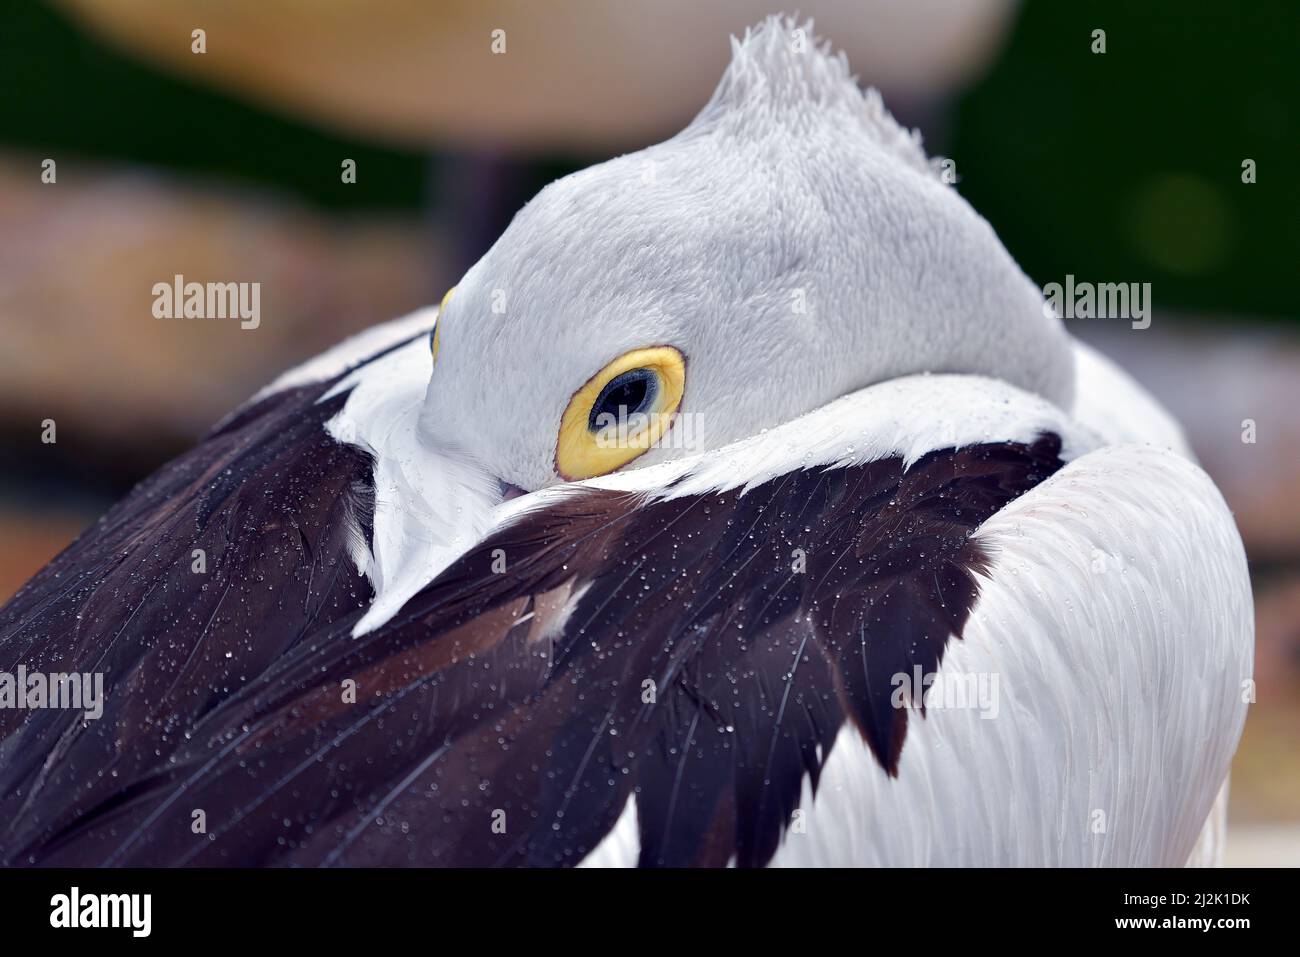 Close-up of an Australian pelican with its head nestled in its wings, Indonesia Stock Photo